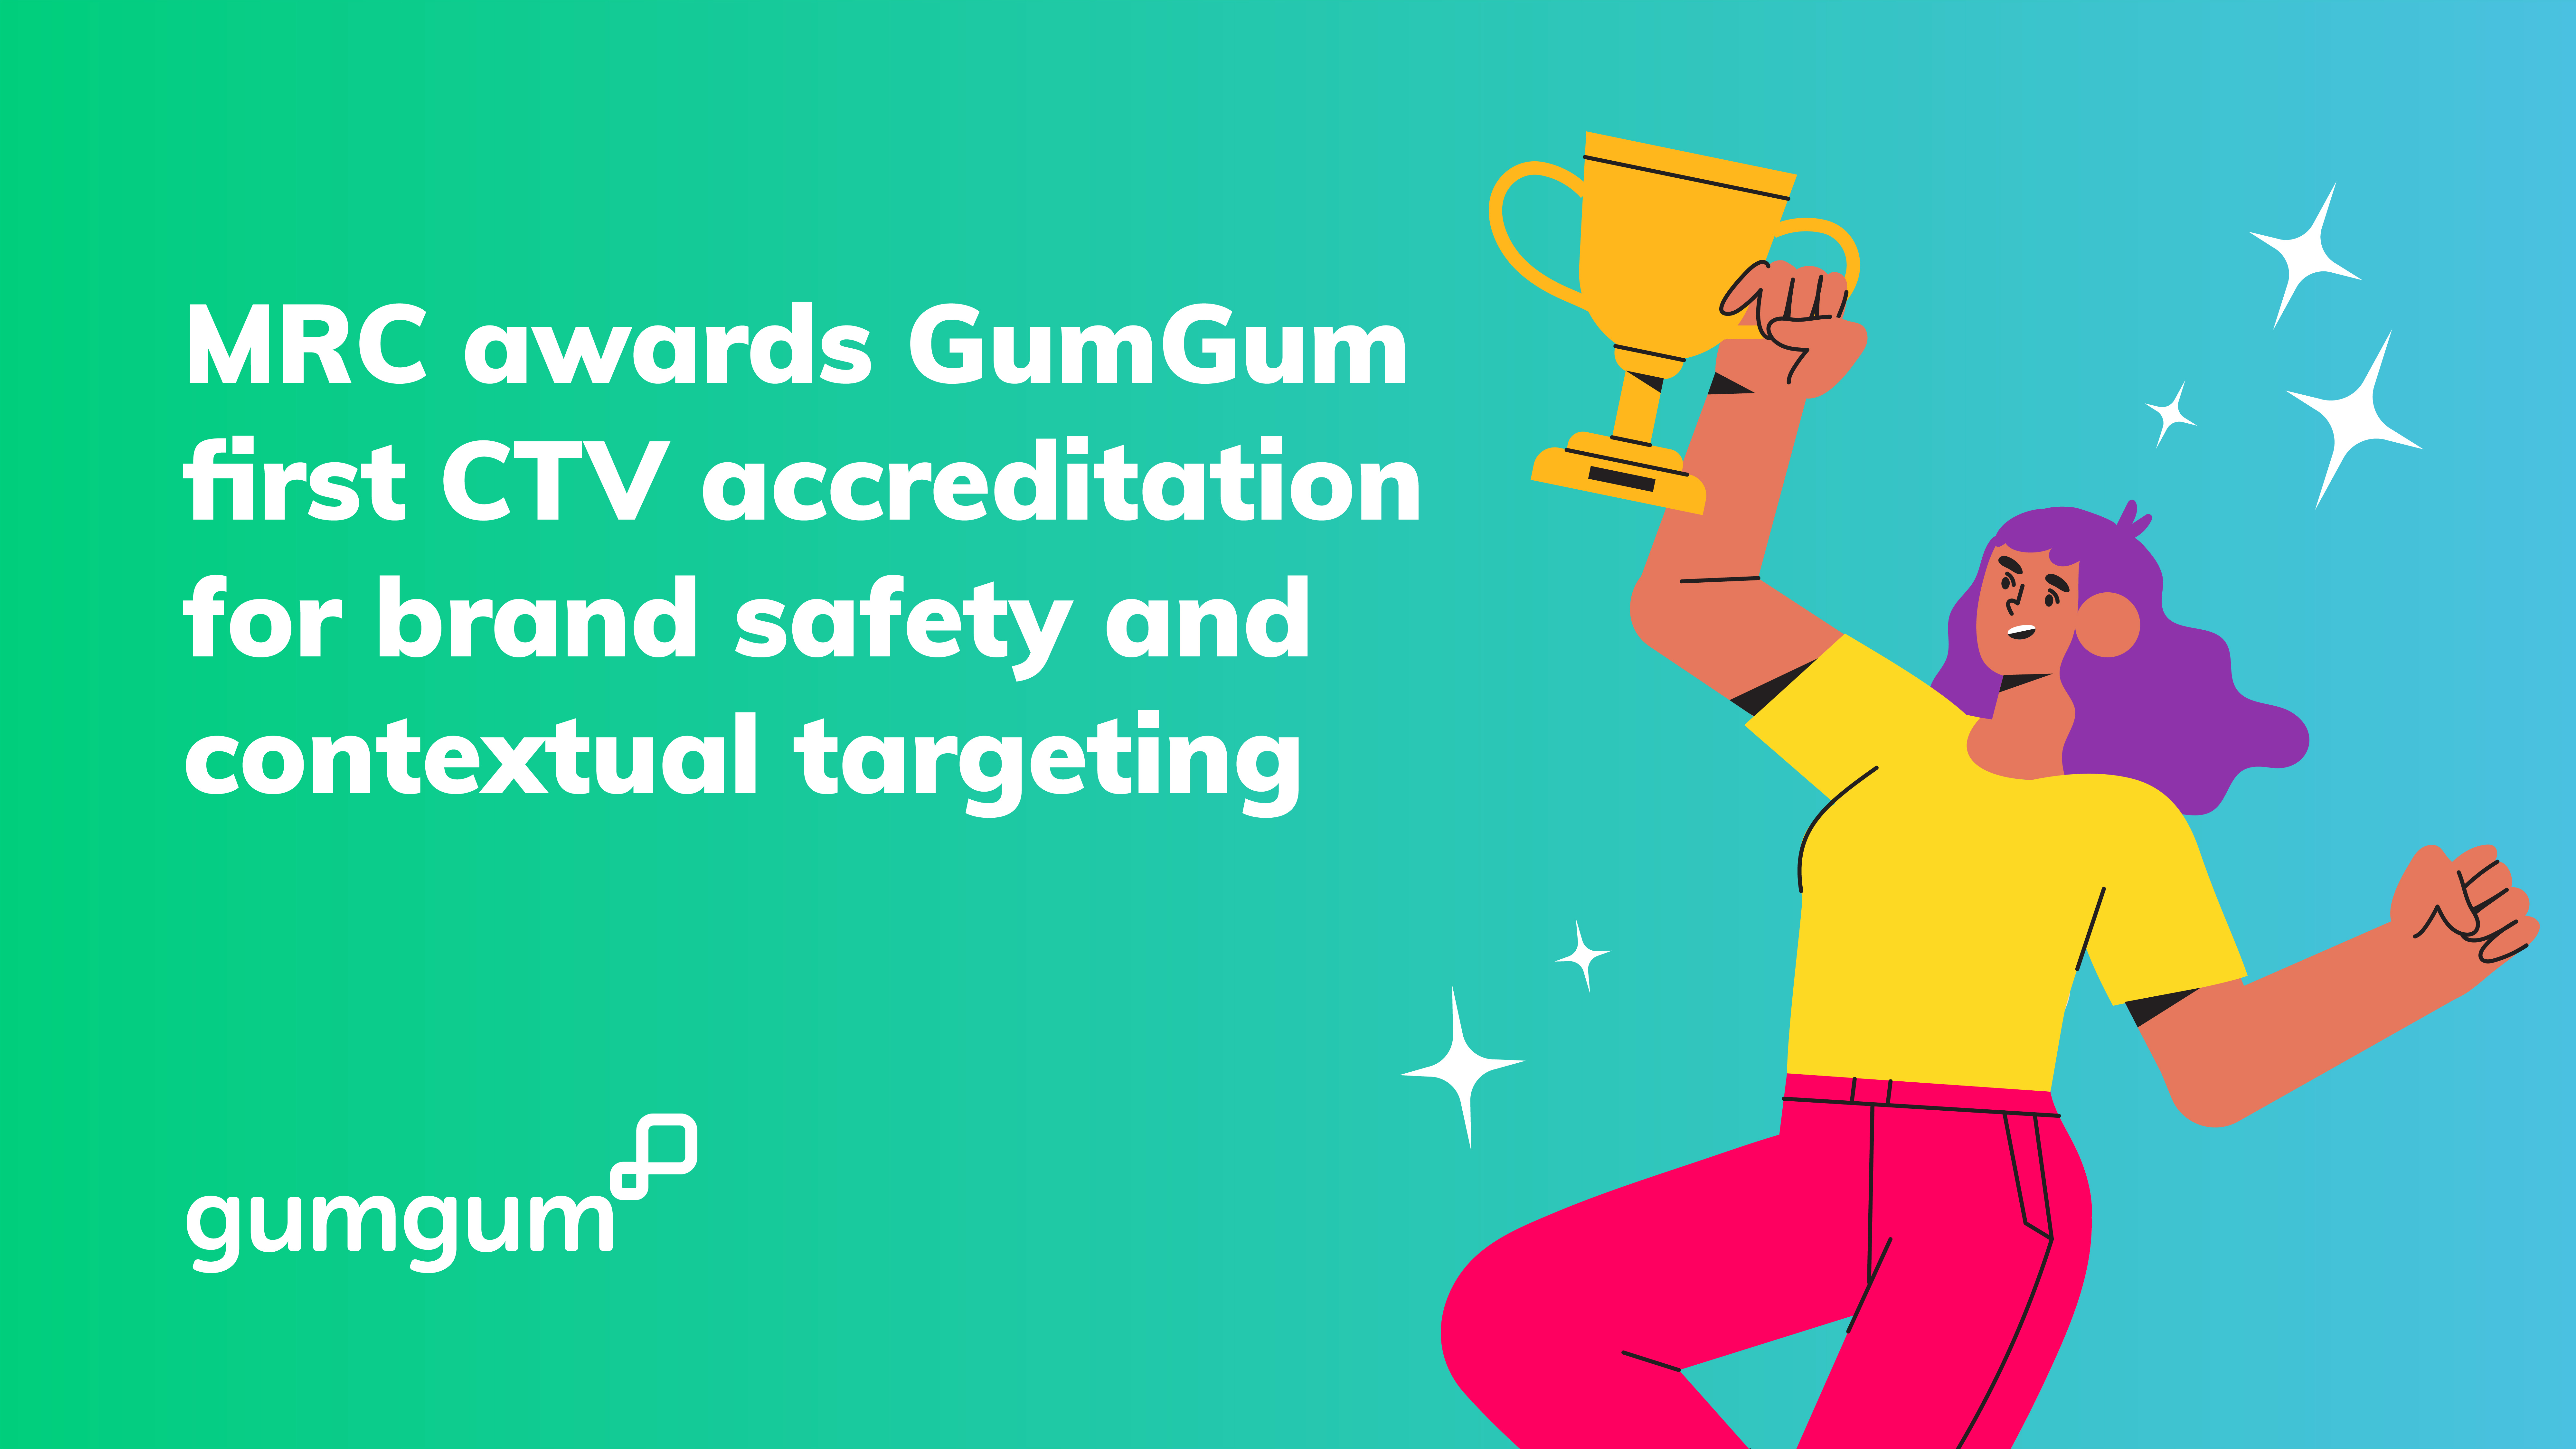 <strong>GumGum Granted First MRC Accreditation for Brand Safety and Contextual Targeting For CTV</strong>